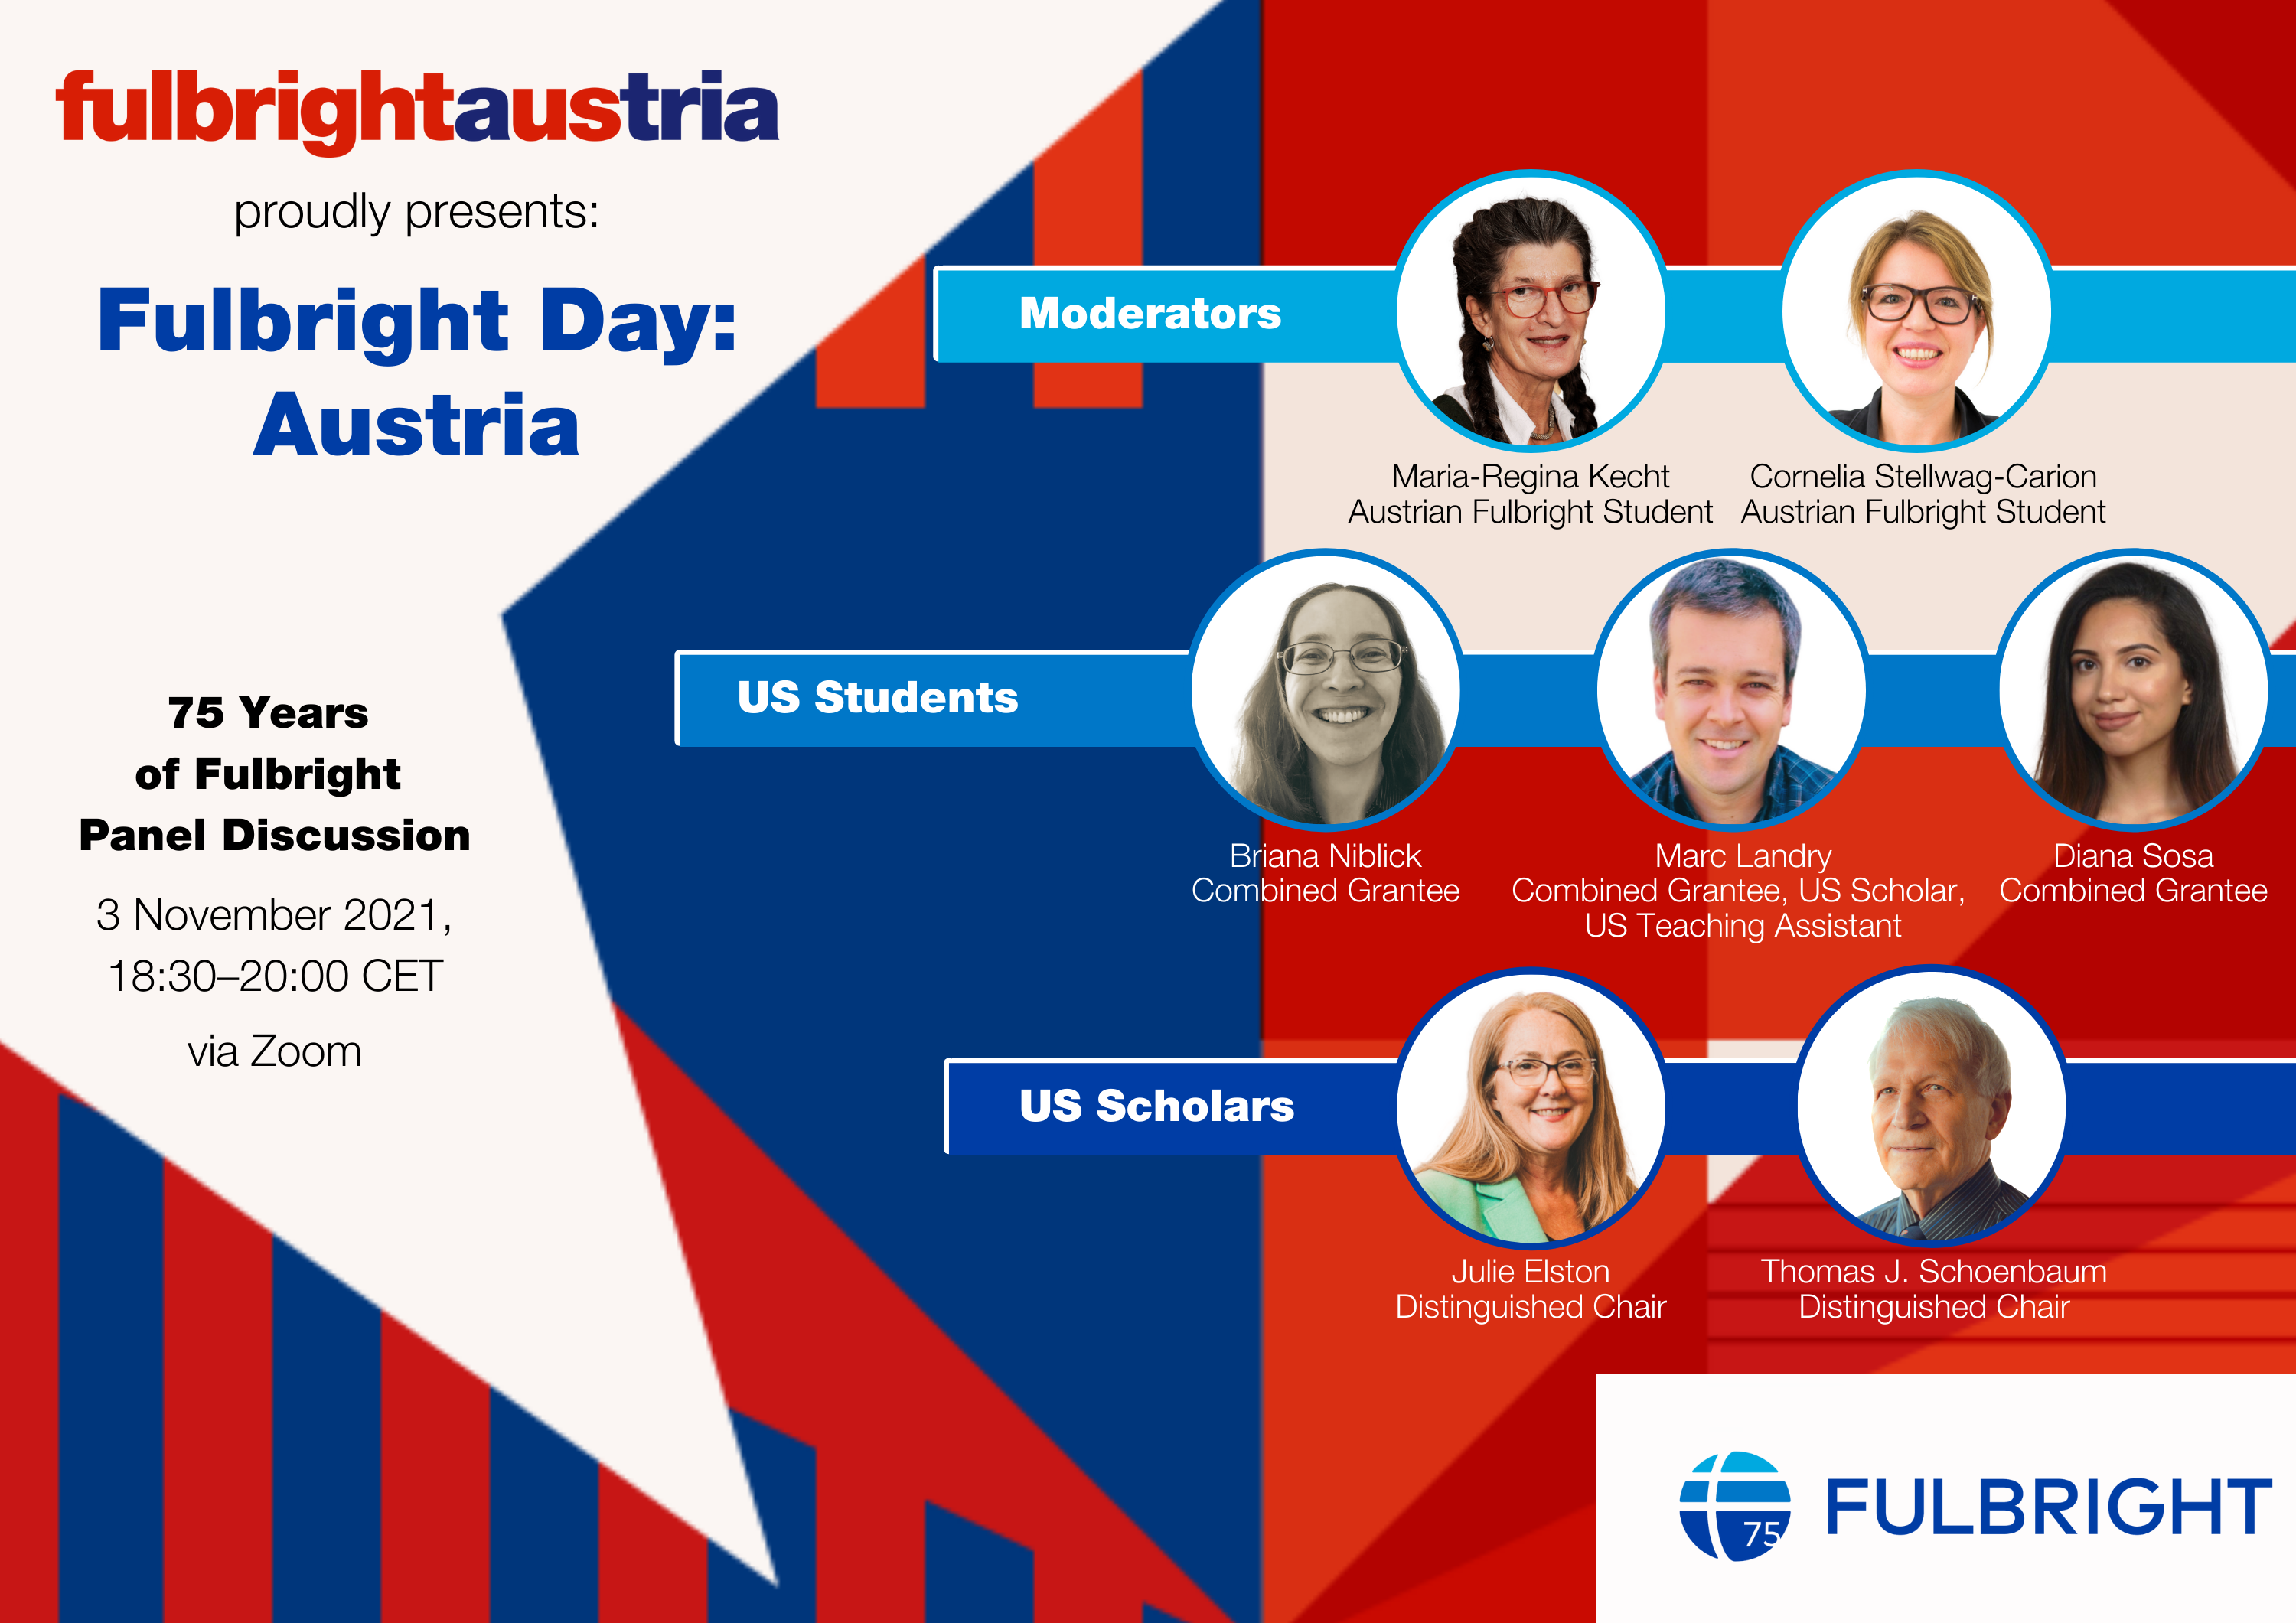 Promotional graphic for Fulbright Day: Austria. Design of red, white, and blue with the Fulbright Austria and Fulbright 75th logo. Text reads: Fulbright Austria proudly presents Fulbright Day: Austria, 75 Years of Fulbright Panel Discussion, 3 November 2021, 18:30-20:00 CET via Zoom. Moderators, US Students, and US Scholars have round headshots.